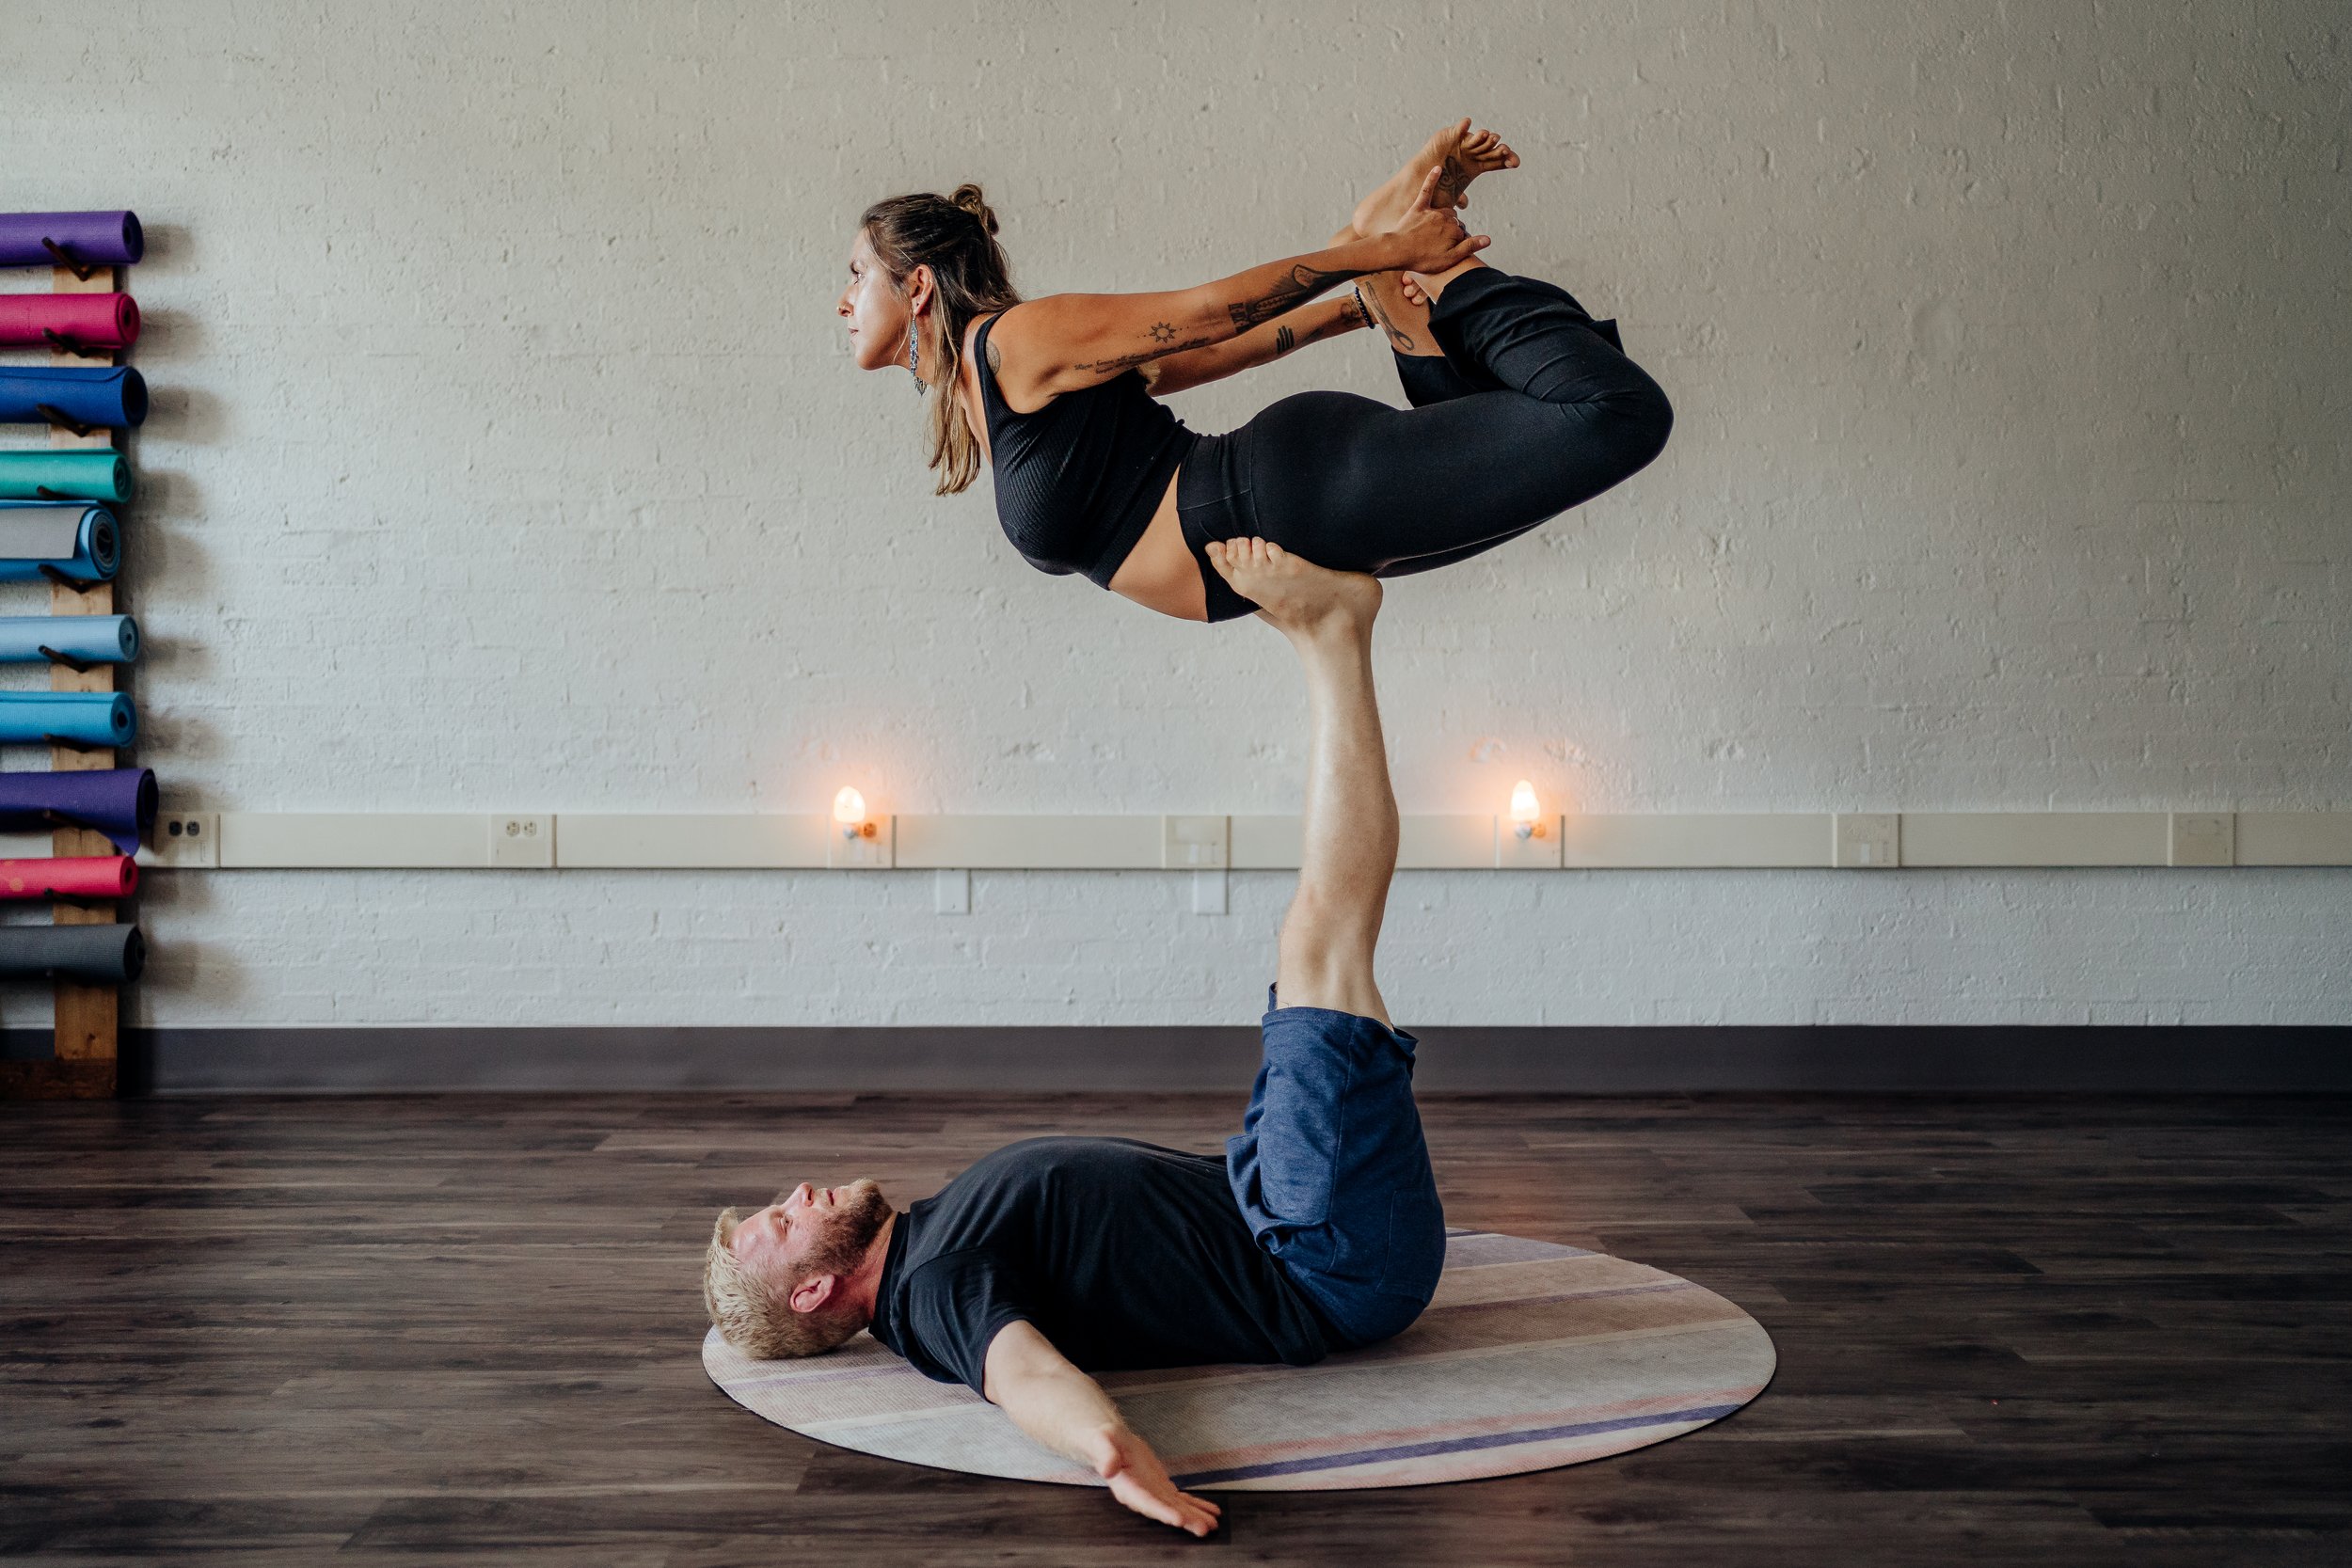 Yoga Poses For Two People: How To Do Yoga With A Partner